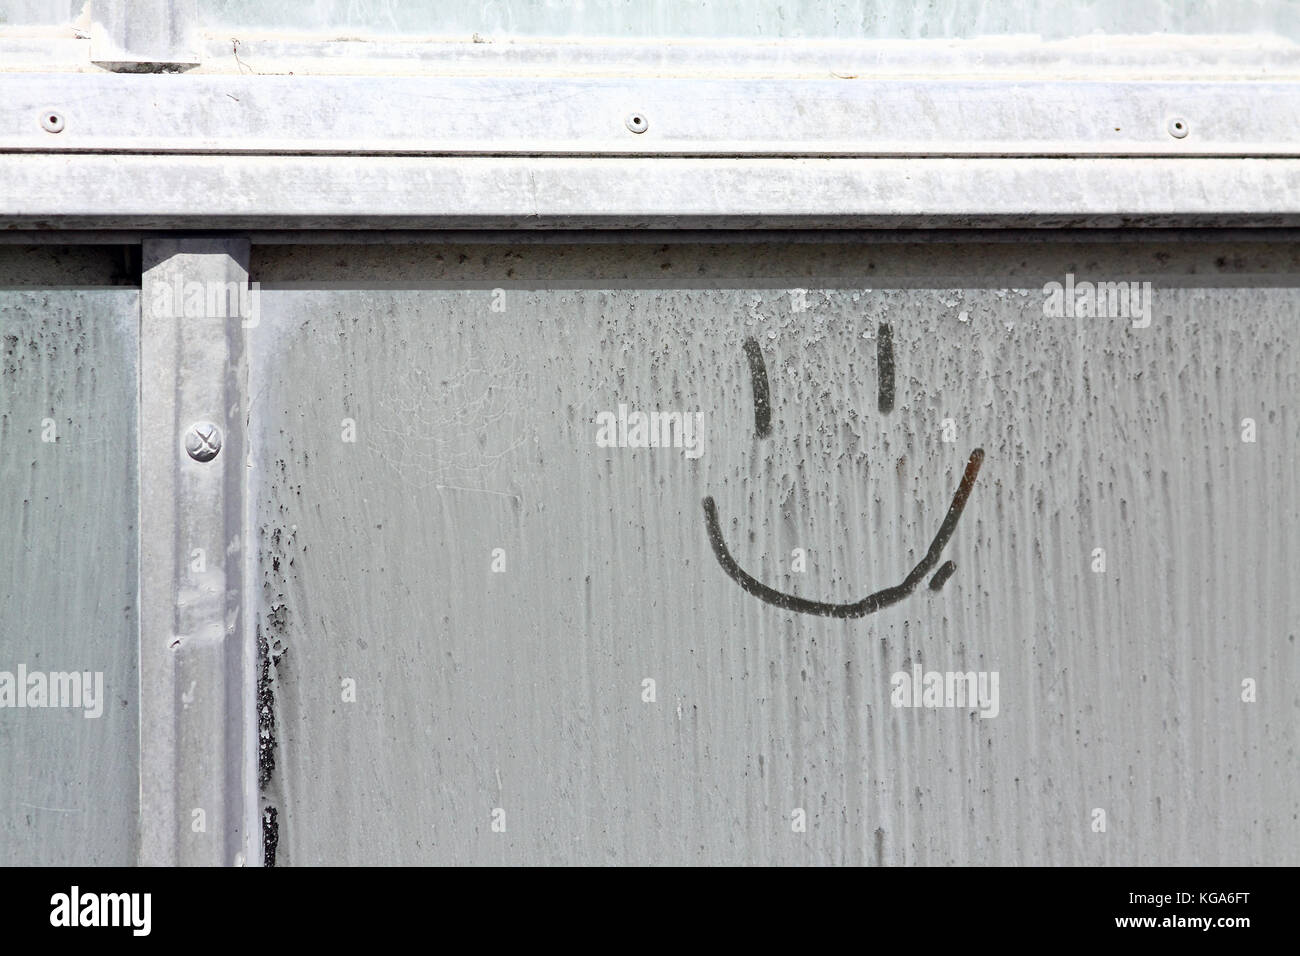 Smiley face drawn on a window Stock Photo